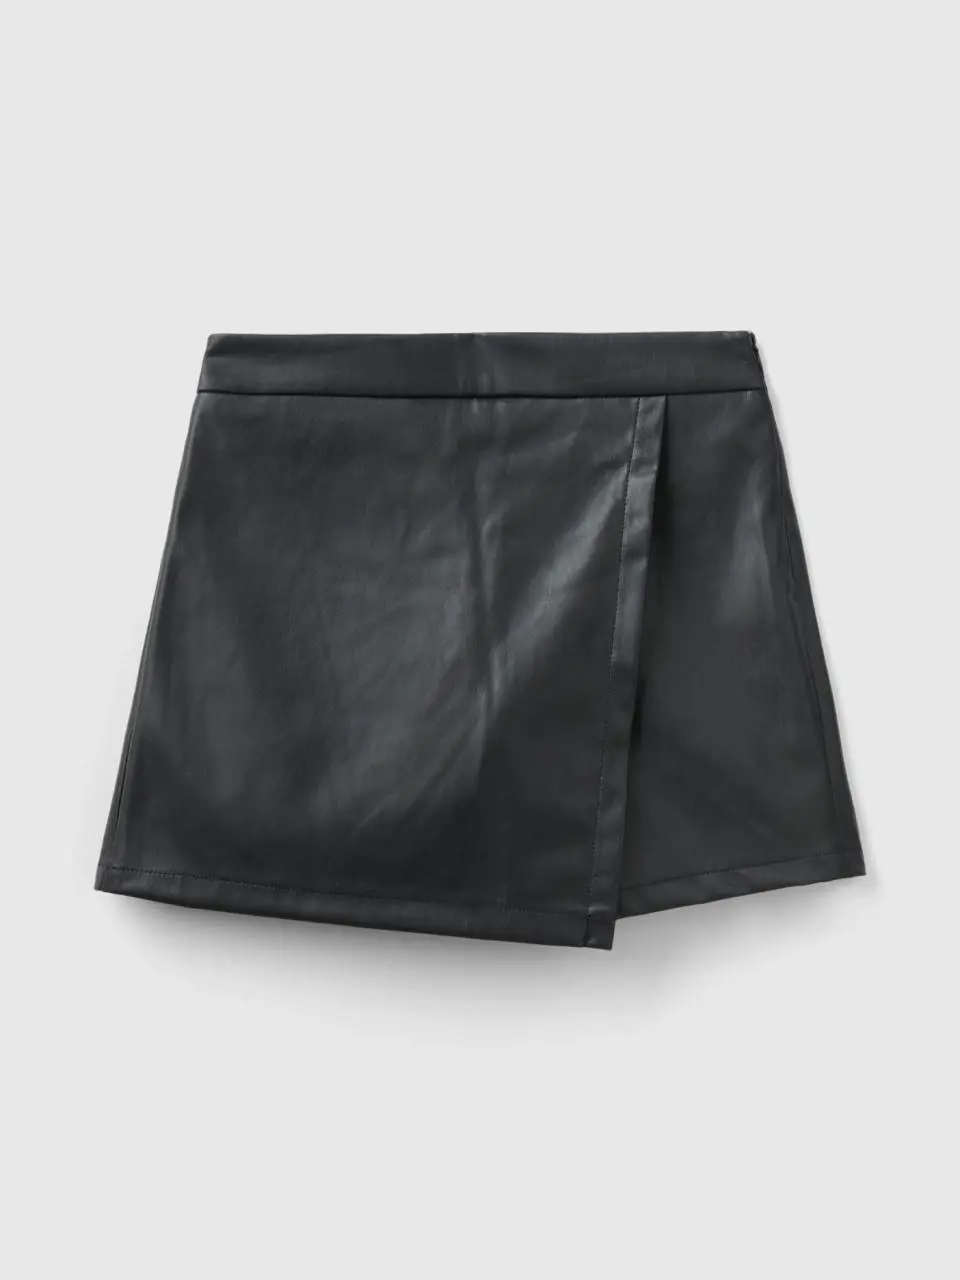 Benetton trousers in imitation leather fabric. 1